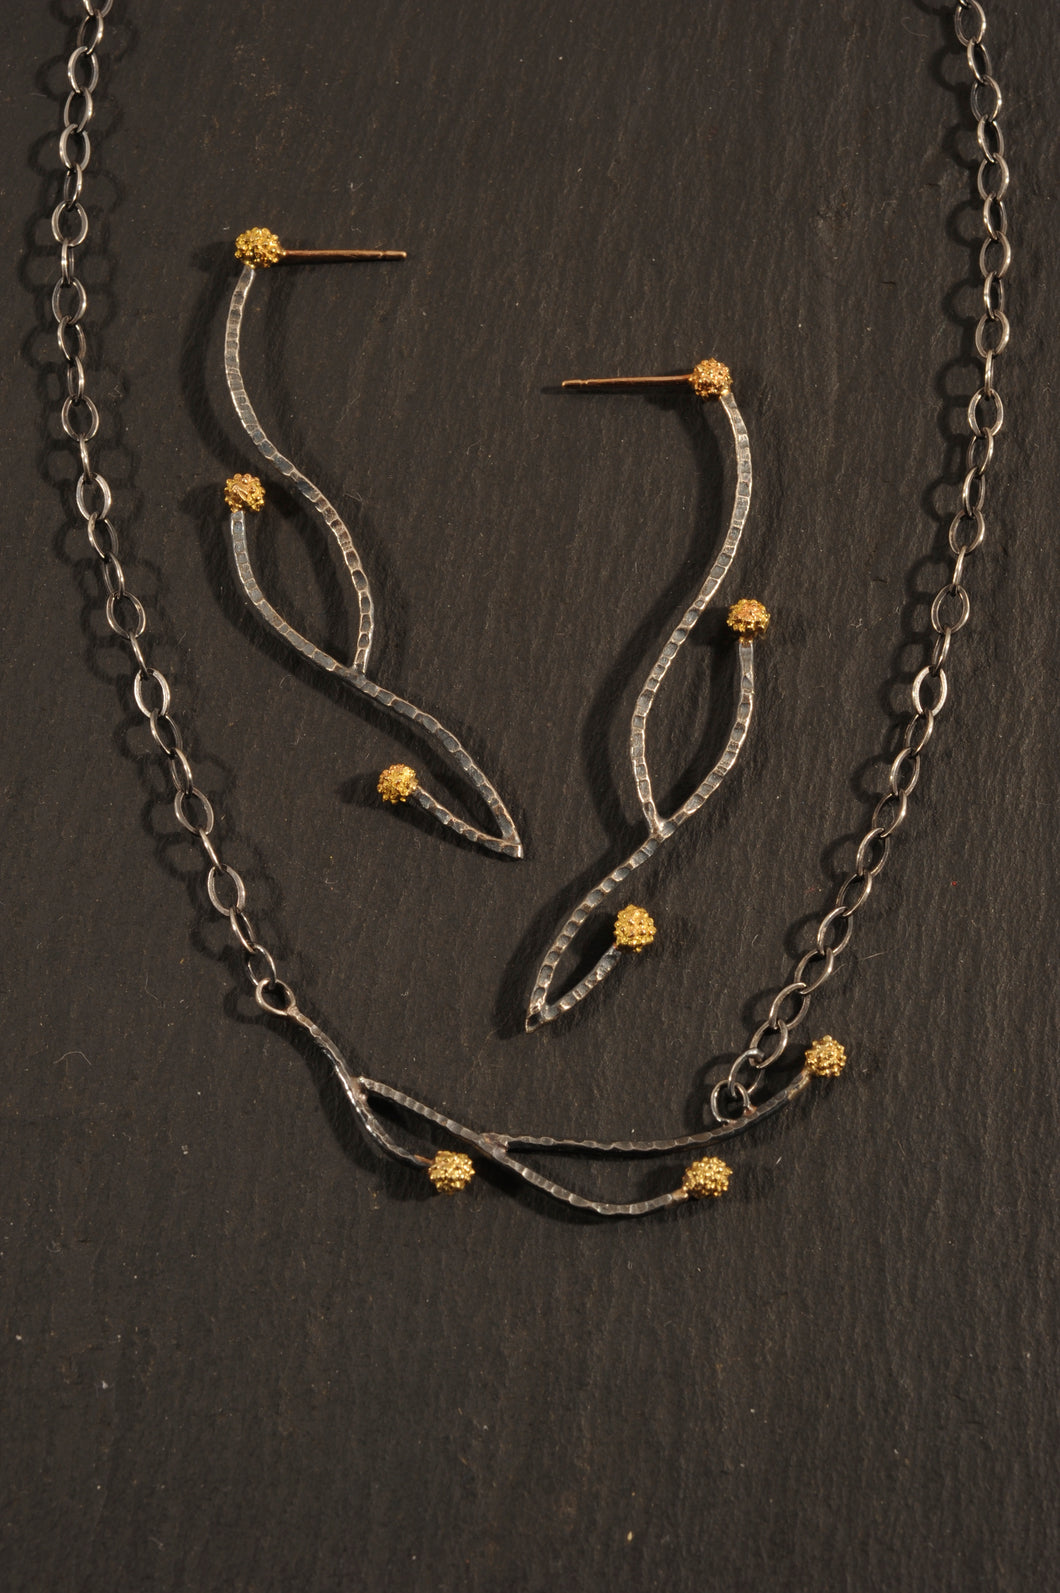 waxberry branch necklace and earrings